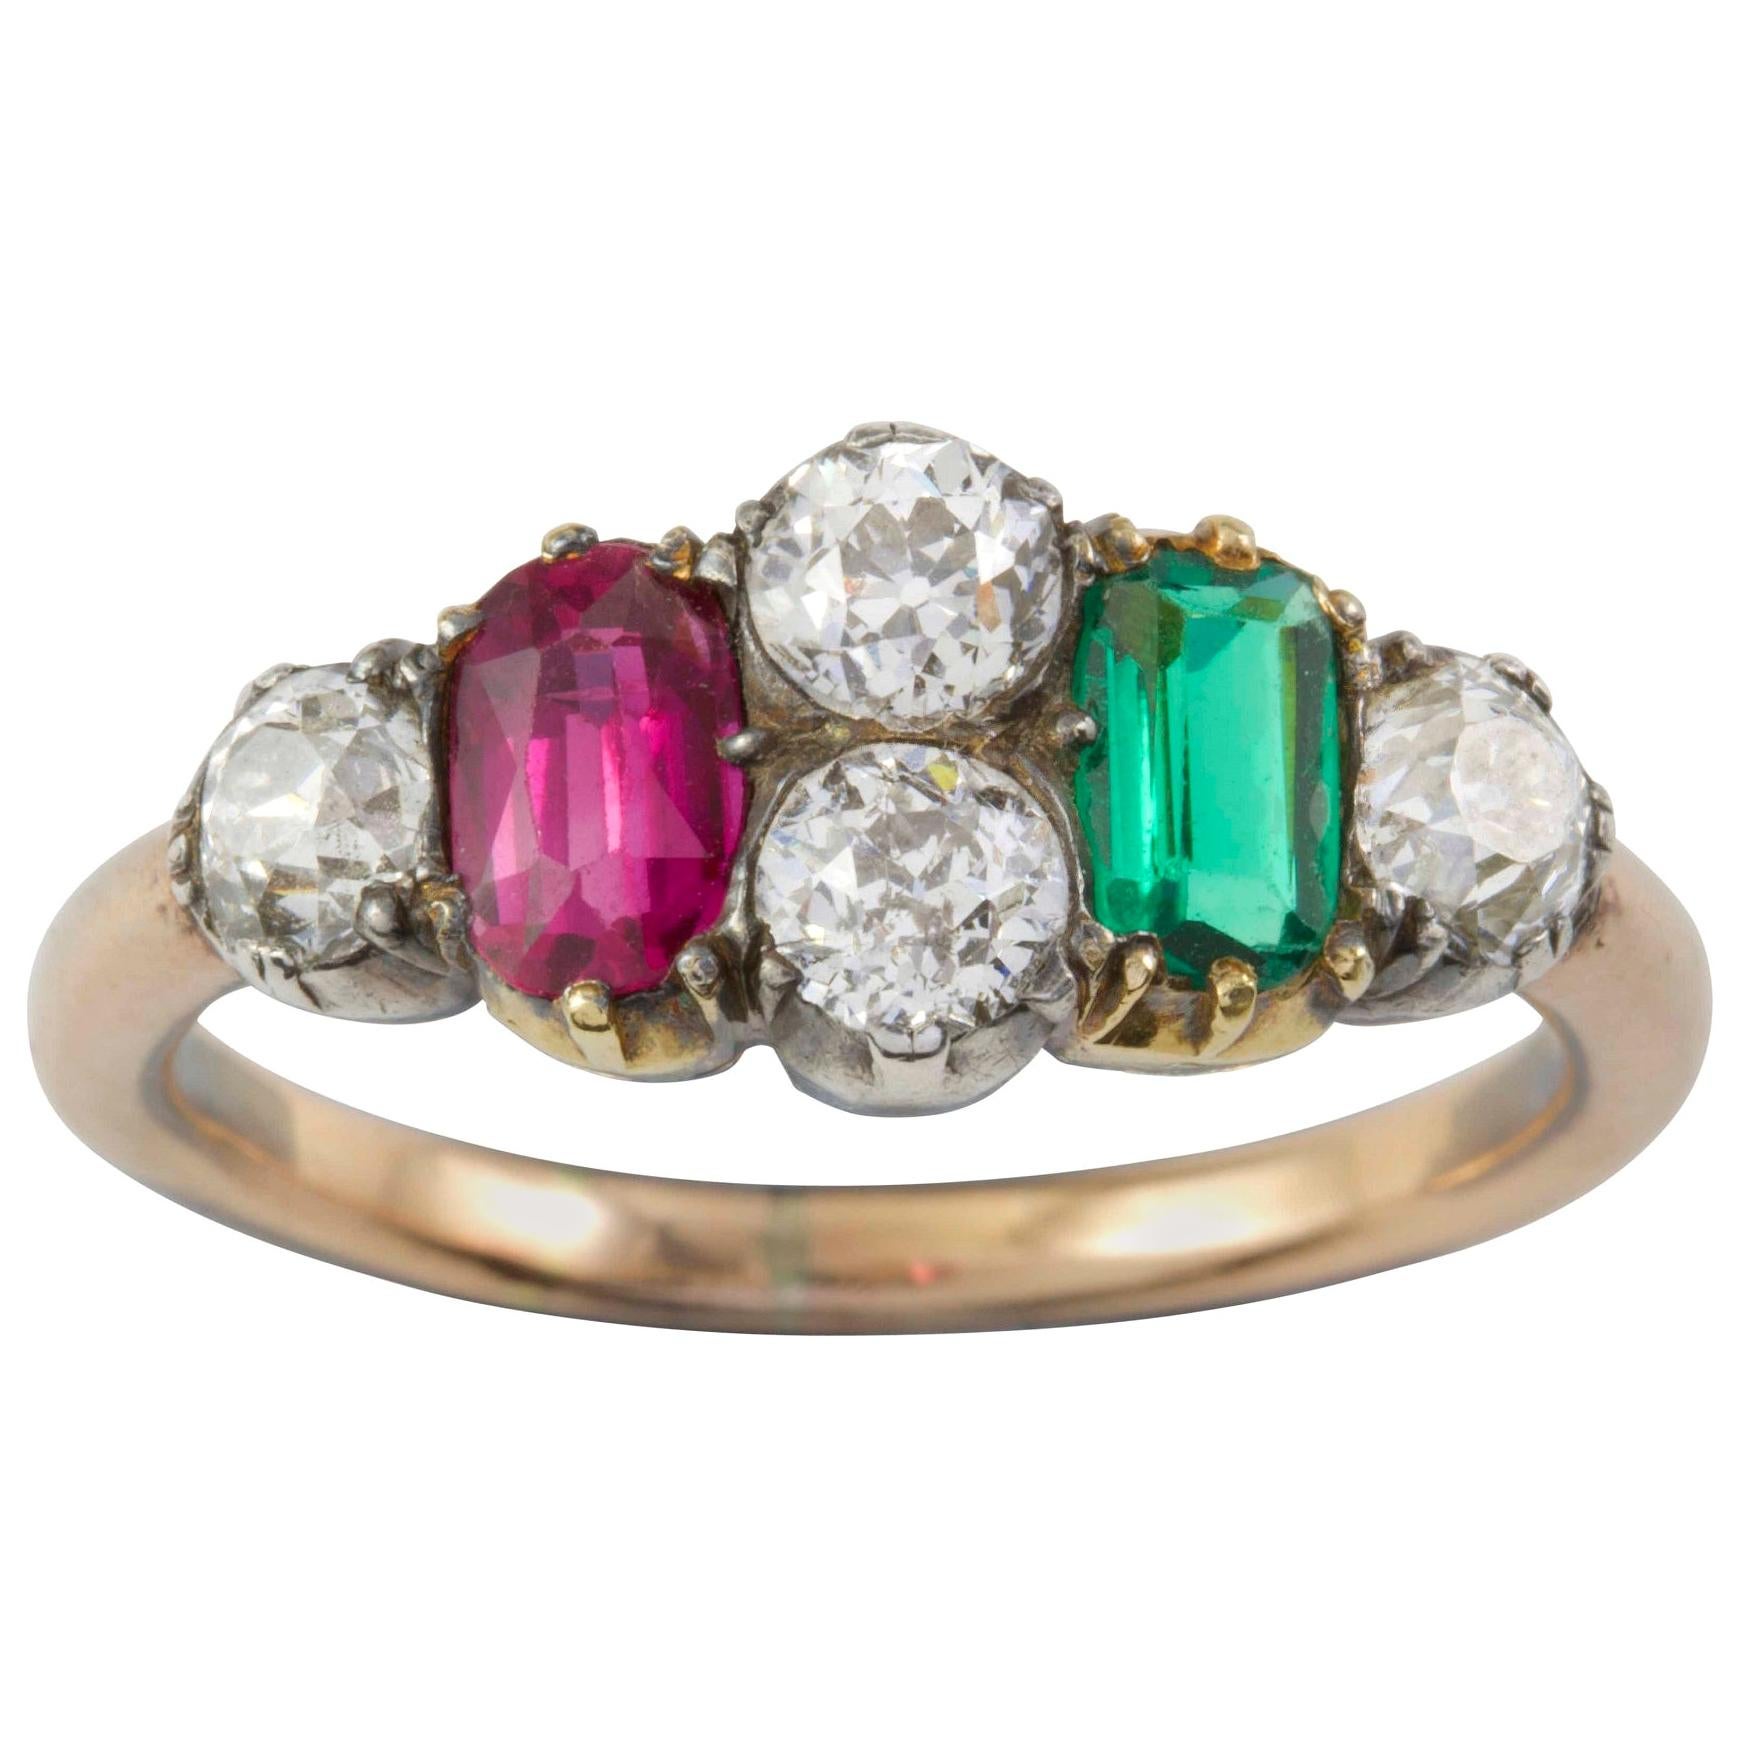 Early Victorian Ruby, Emerald and Diamond Ring